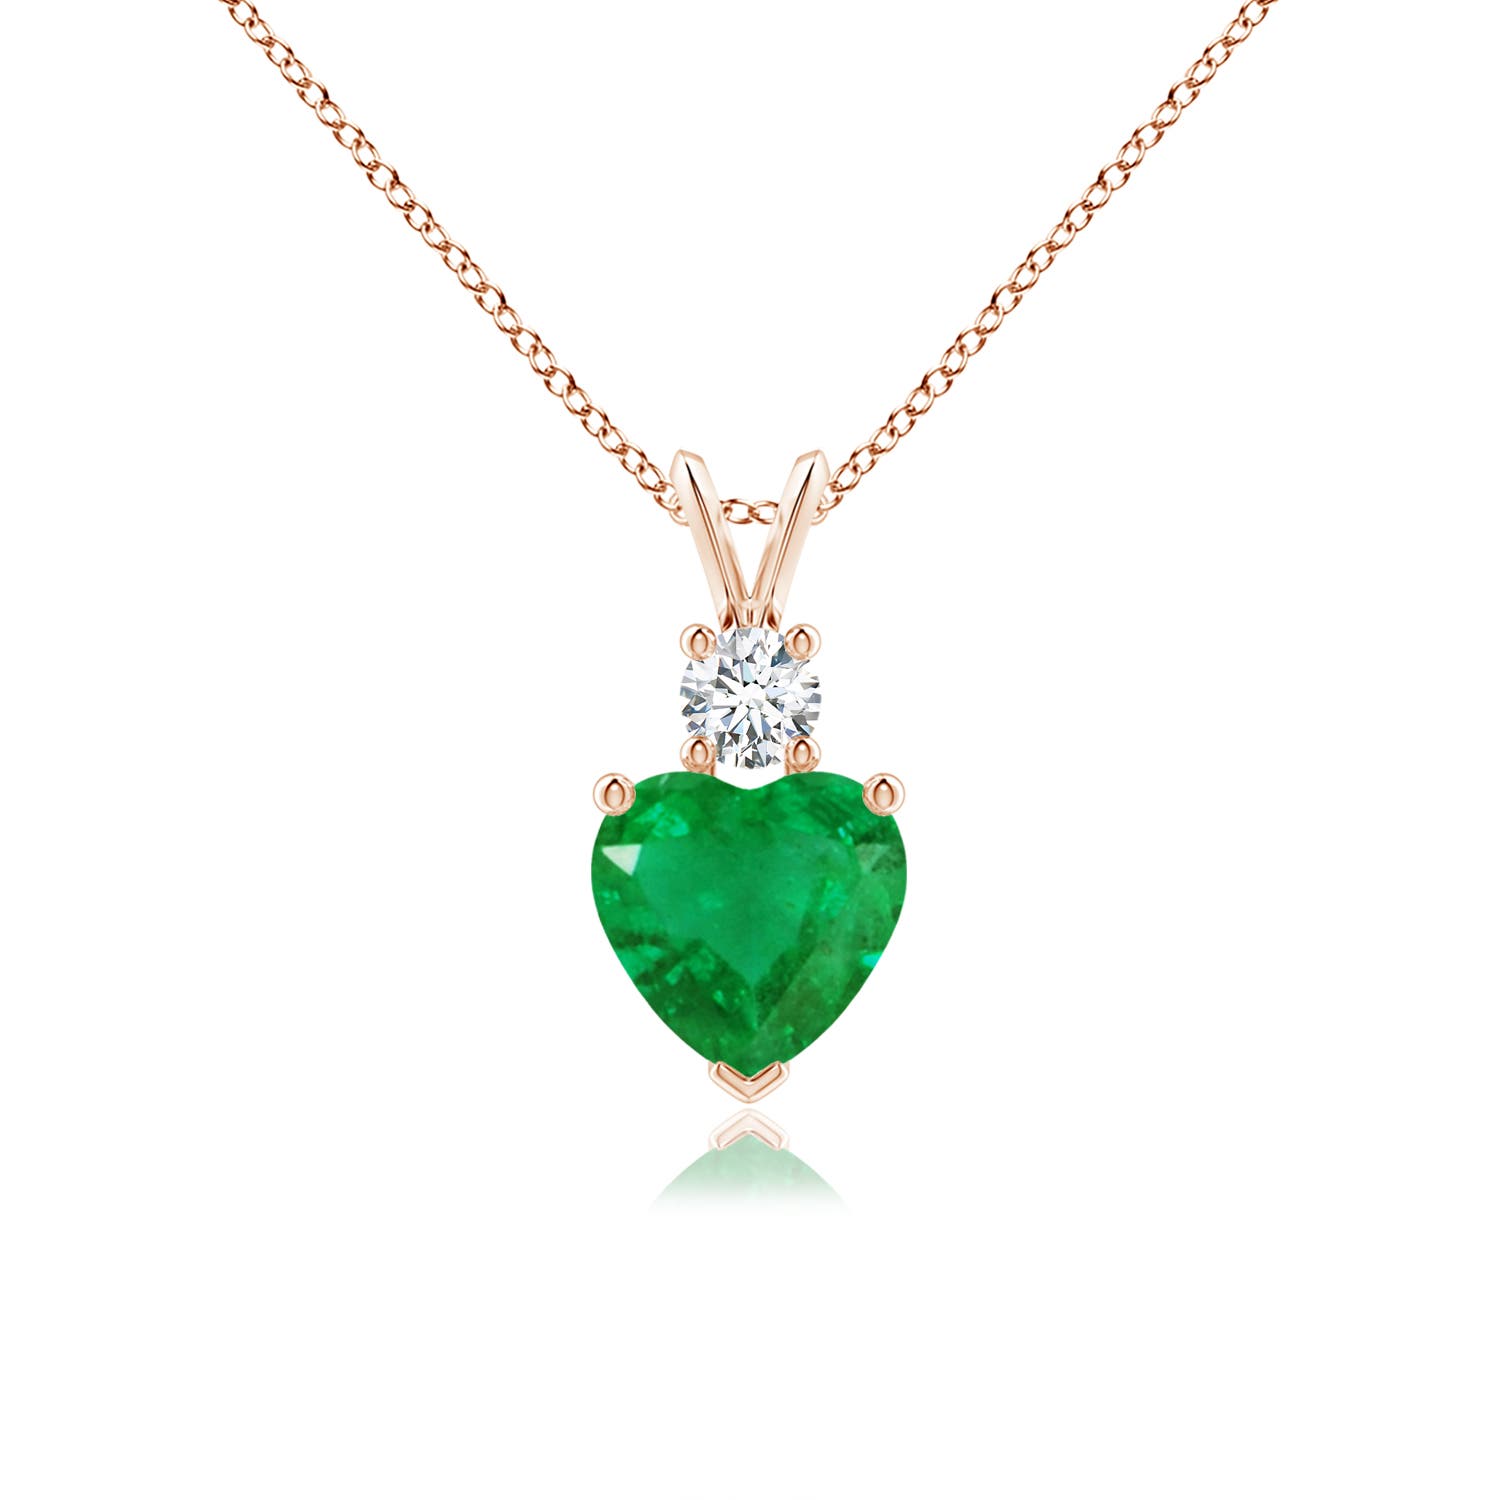 AA - Emerald / 1.35 CT / 14 KT Rose Gold